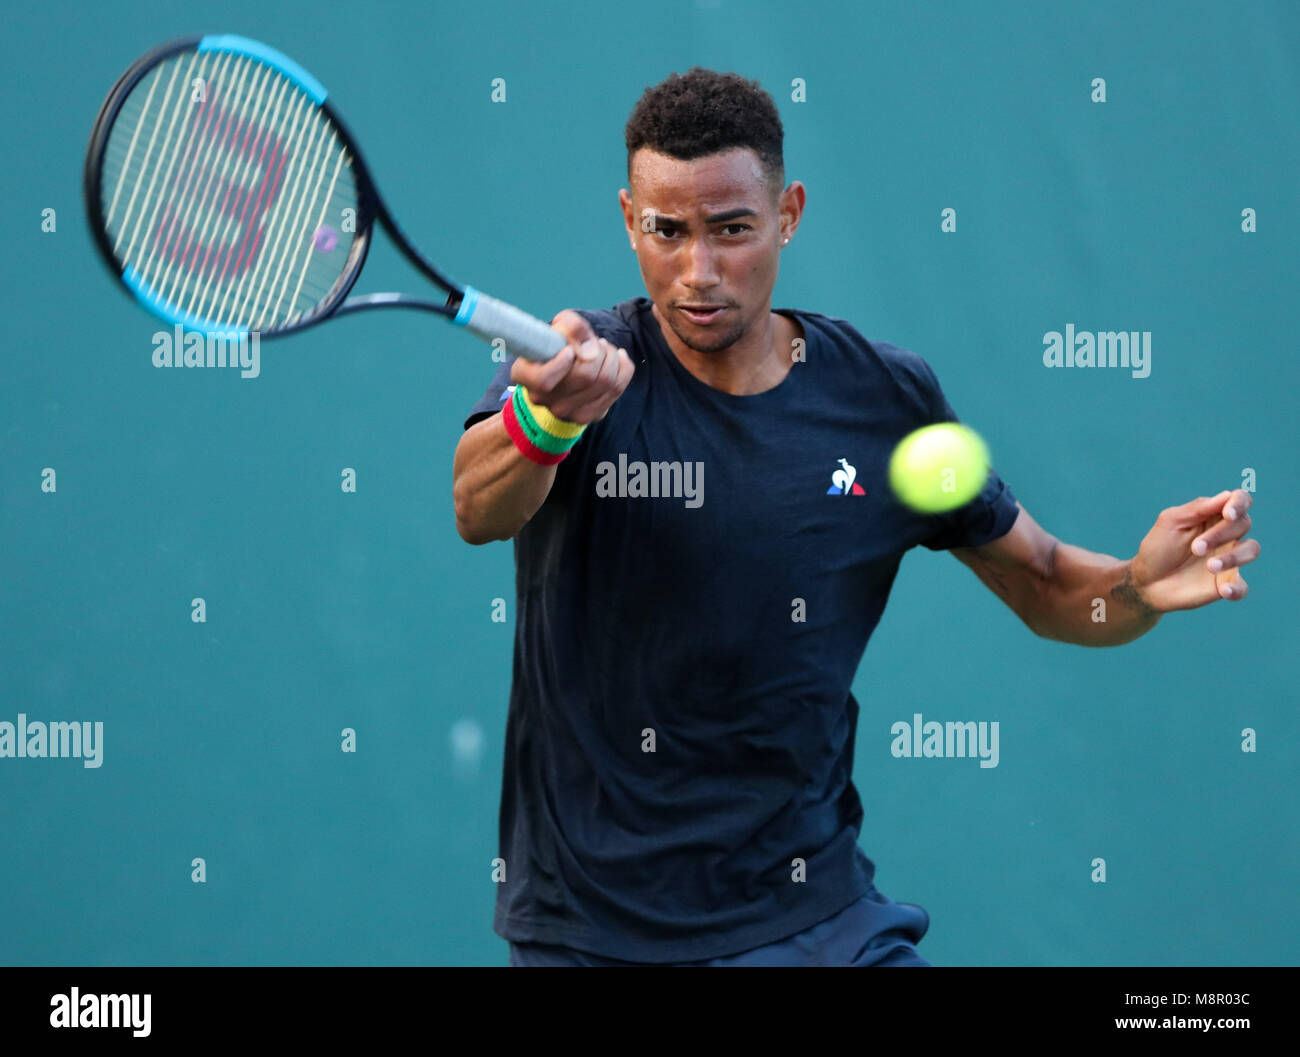 Key Biscayne, Florida, USA. 19th Mar, 2018. Calvin Hemery from France  returns against Yannick Hanfmann from Germany during a qualifying round at  the 2018 Miami Open presented by Itau professional tennis tournament,